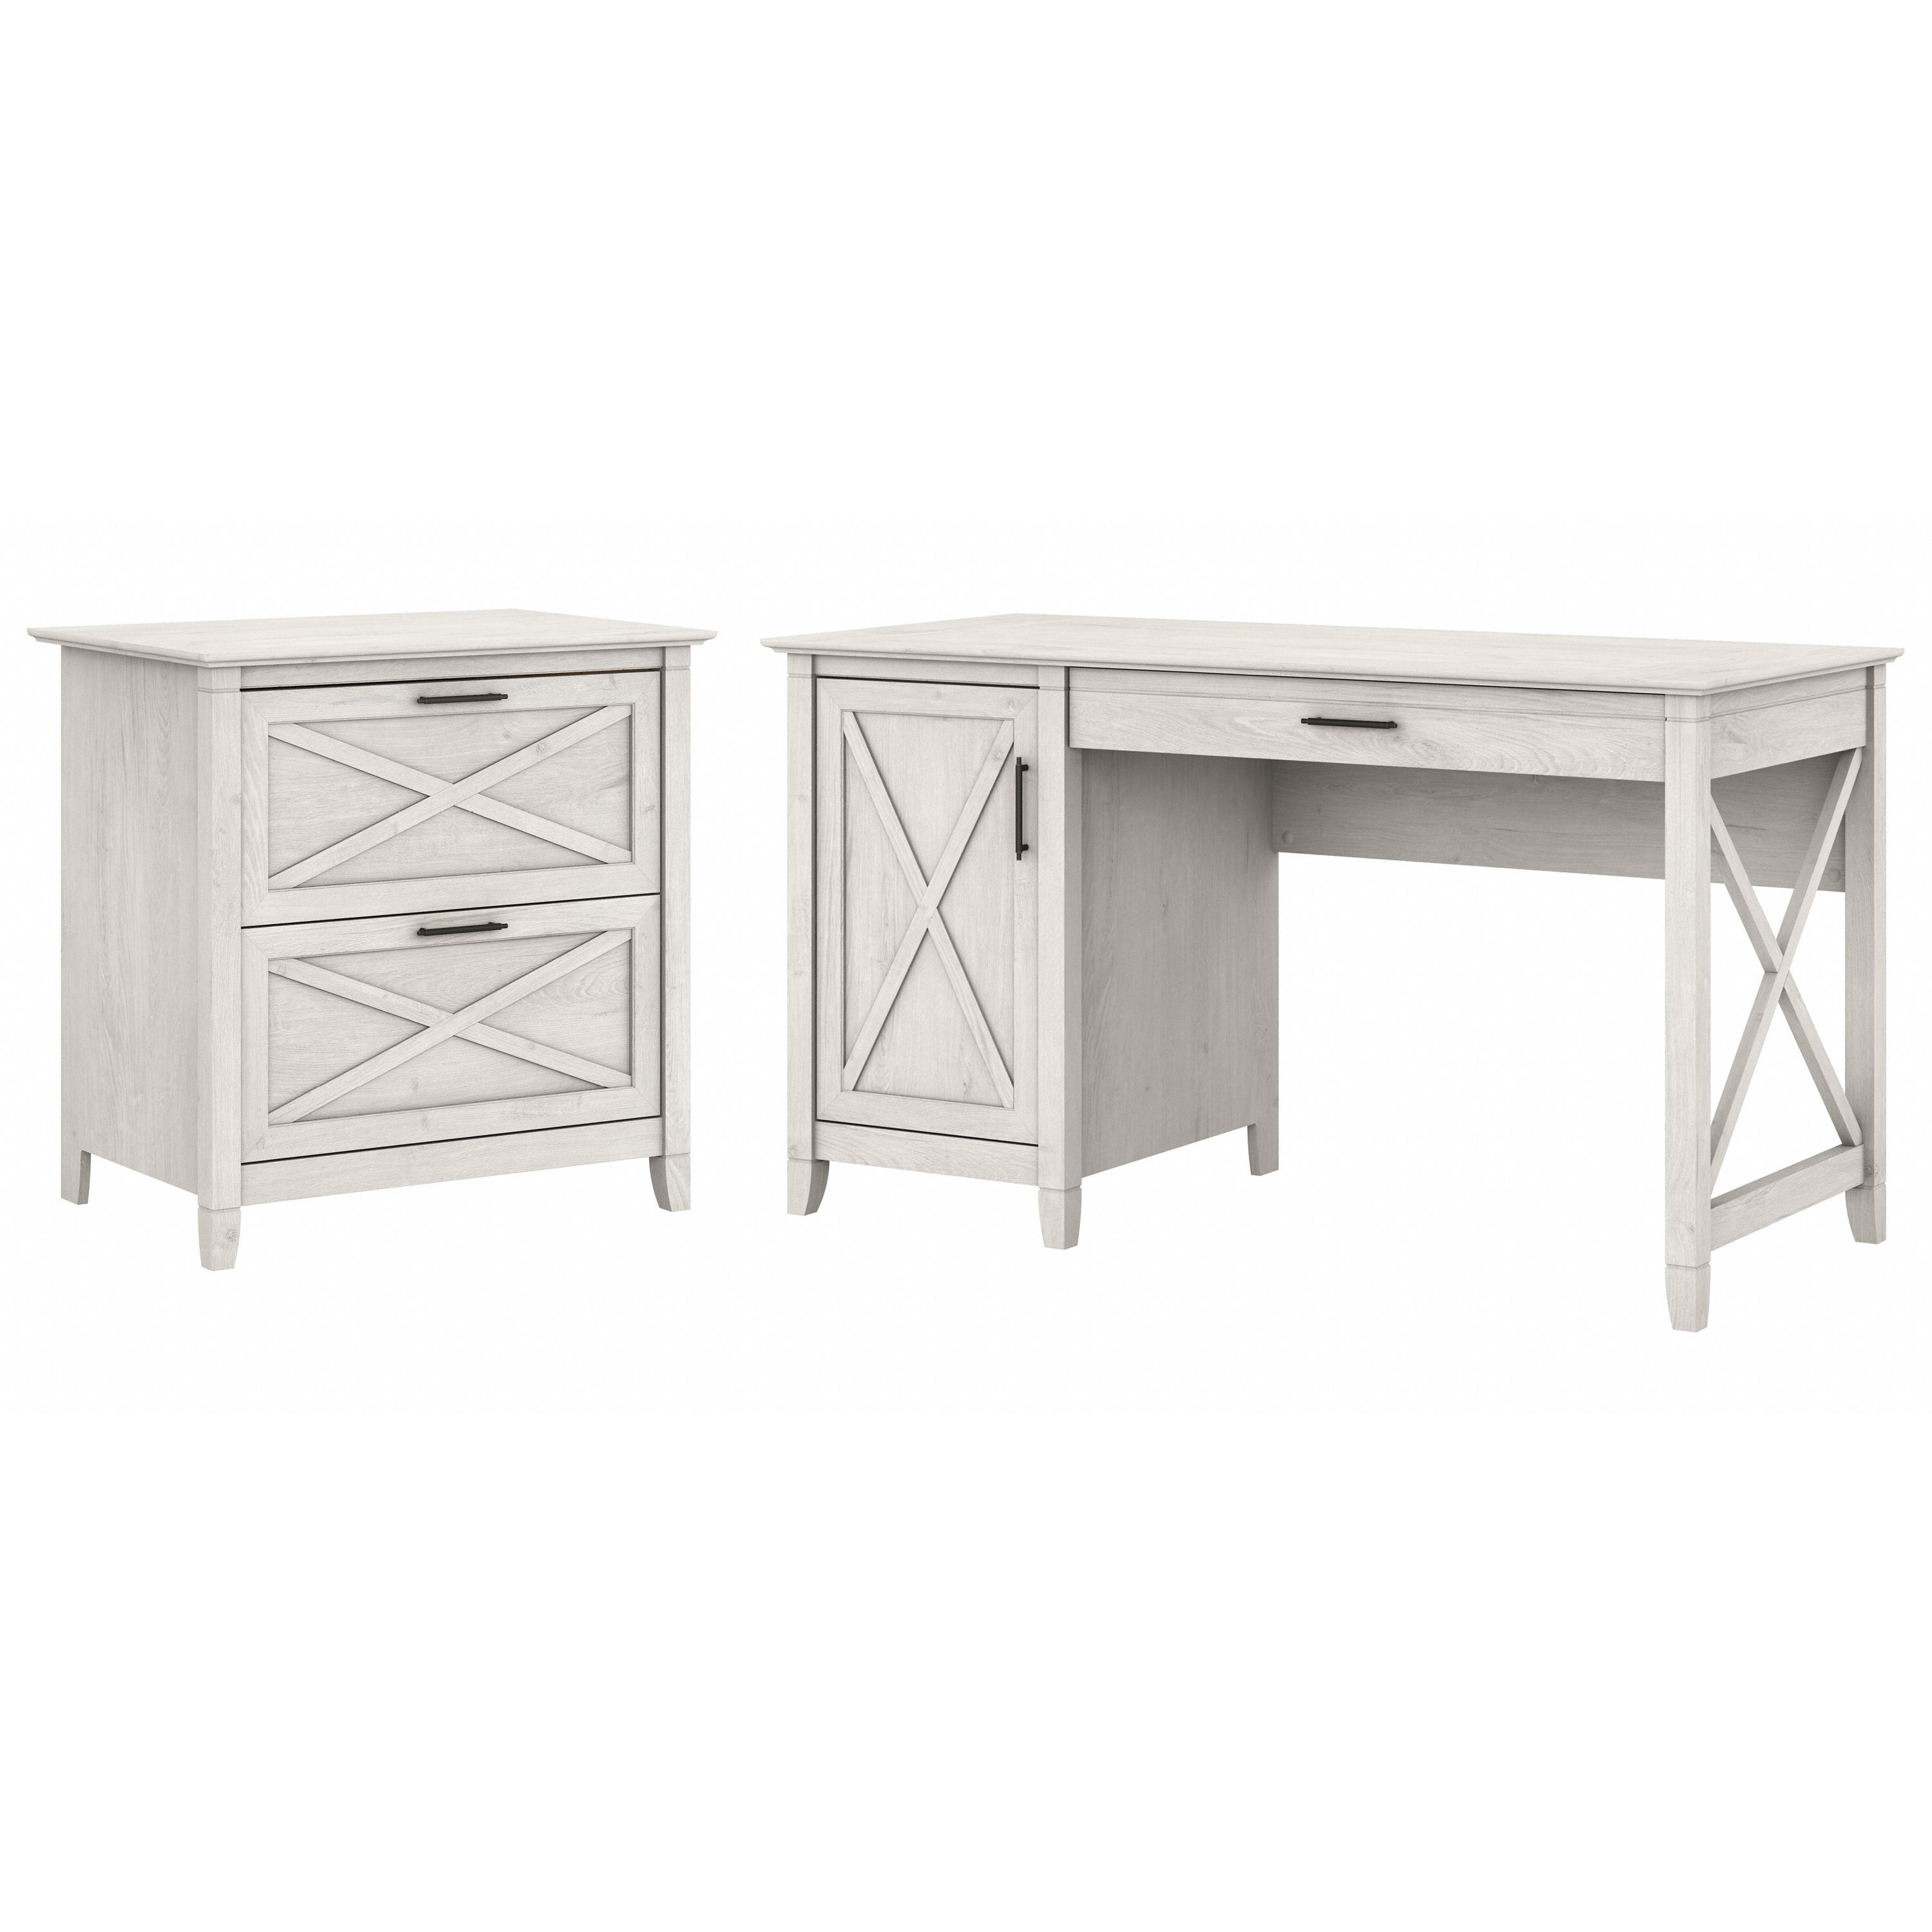 Shop Bush Furniture Key West 54W Computer Desk with Storage and 2 Drawer Lateral File Cabinet 02 KWS008LW #color_linen white oak